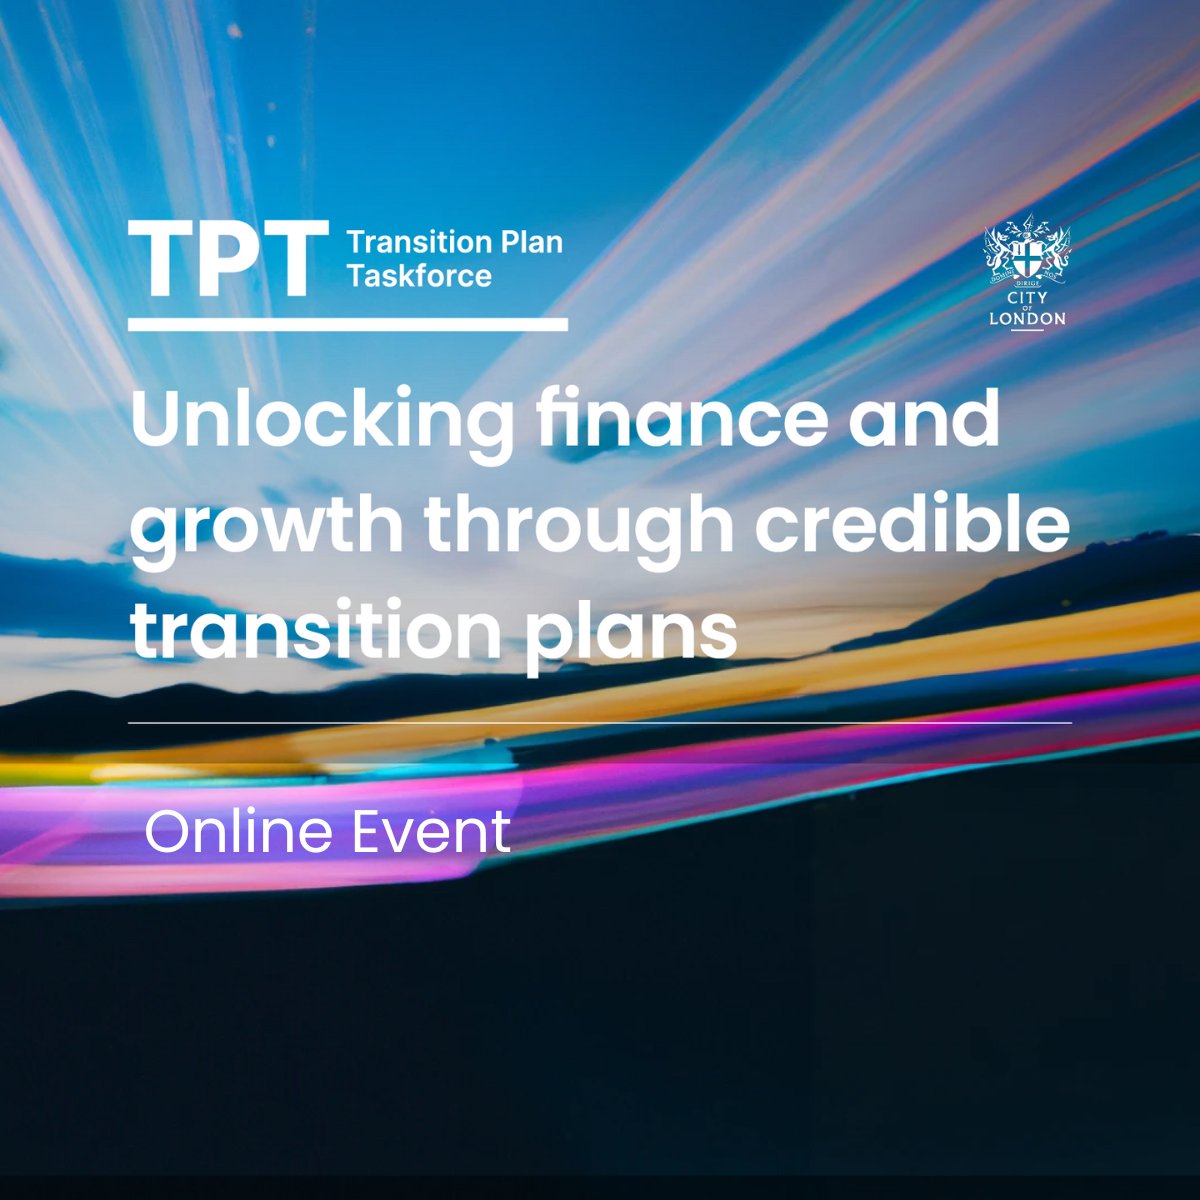 How #transitionplans can unlock #finance and #growth – TPT announces speakers from SSE, Compass UK & Ireland, NEST, Weir Group, Lloyds Banking Group, #TransitionFinanceMarketReview and a serving MP. Register for live stream 18:00-19:45 Tues 9 April. eventbrite.com/e/unlocking-fi…